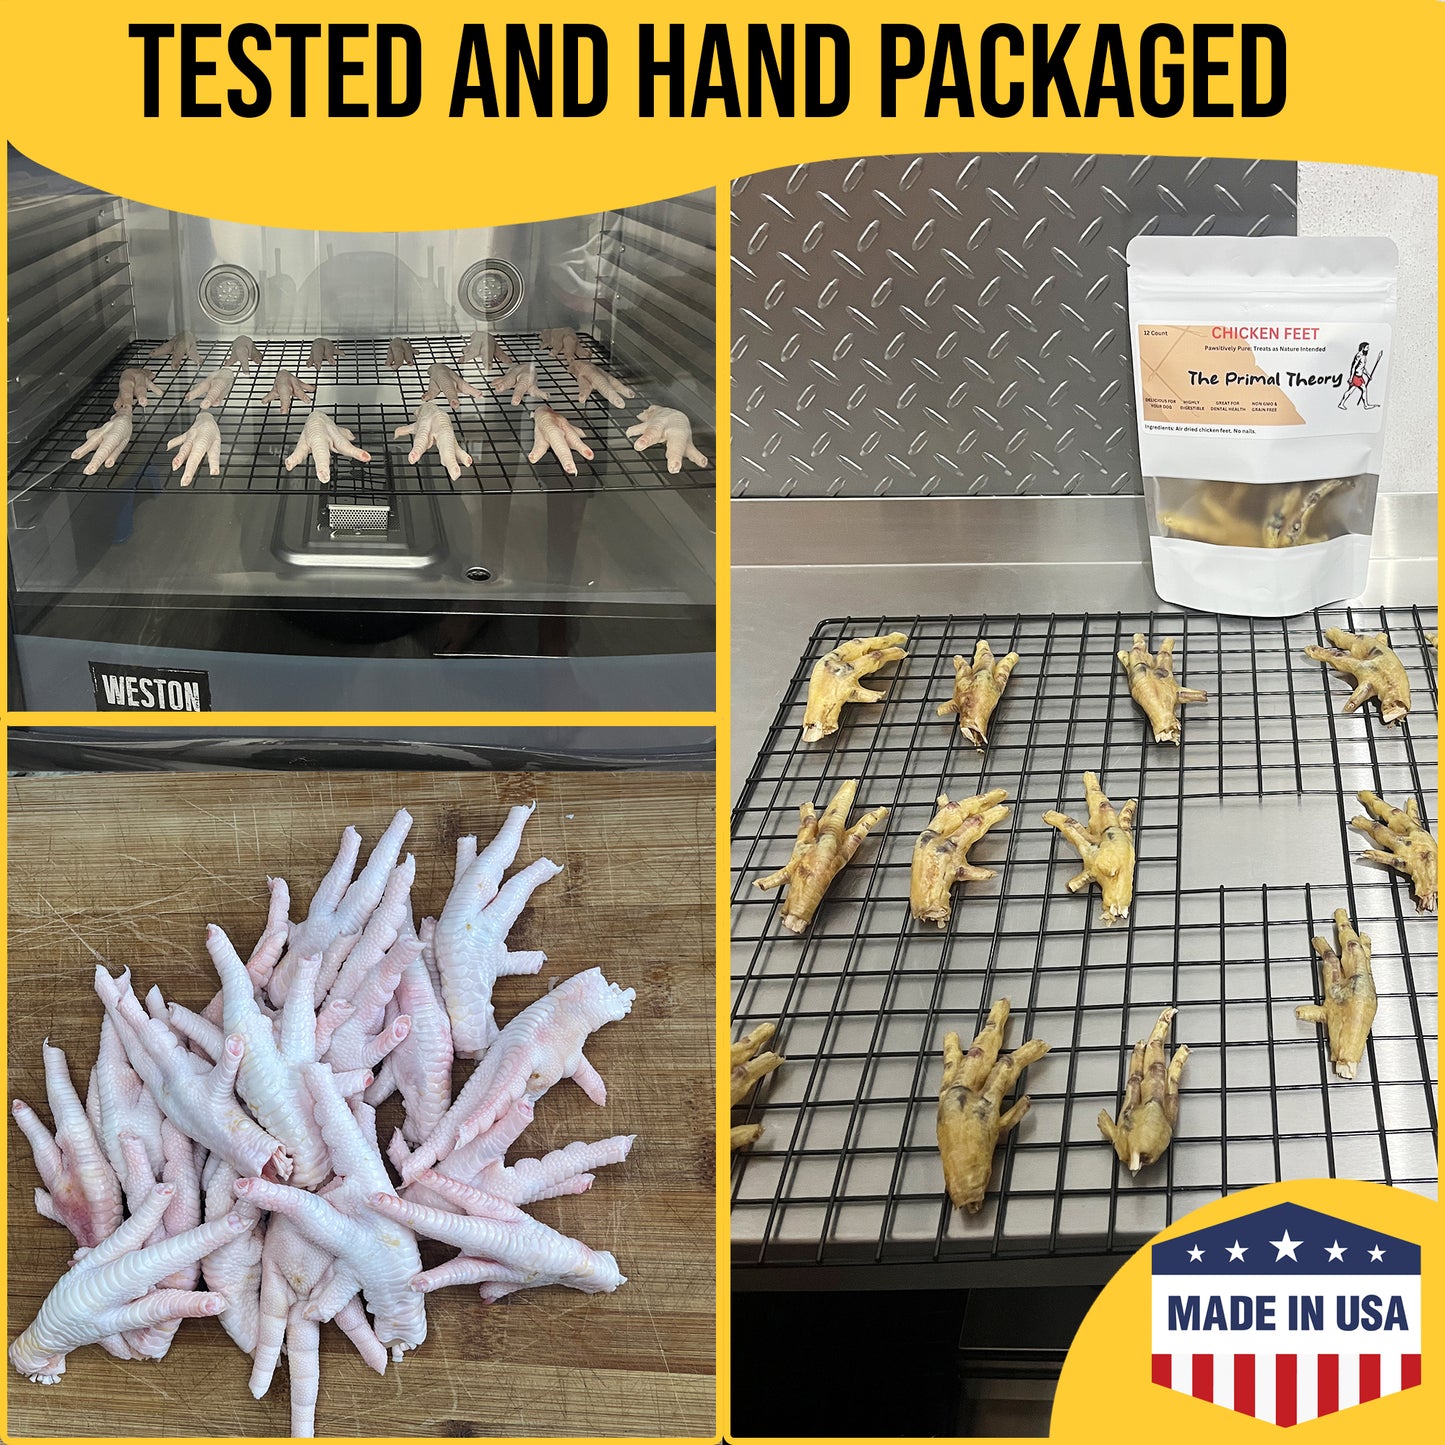 Chicken Feet (Air dried, no nails) Single Natural Ingredient Treat for Dogs. 12 Count